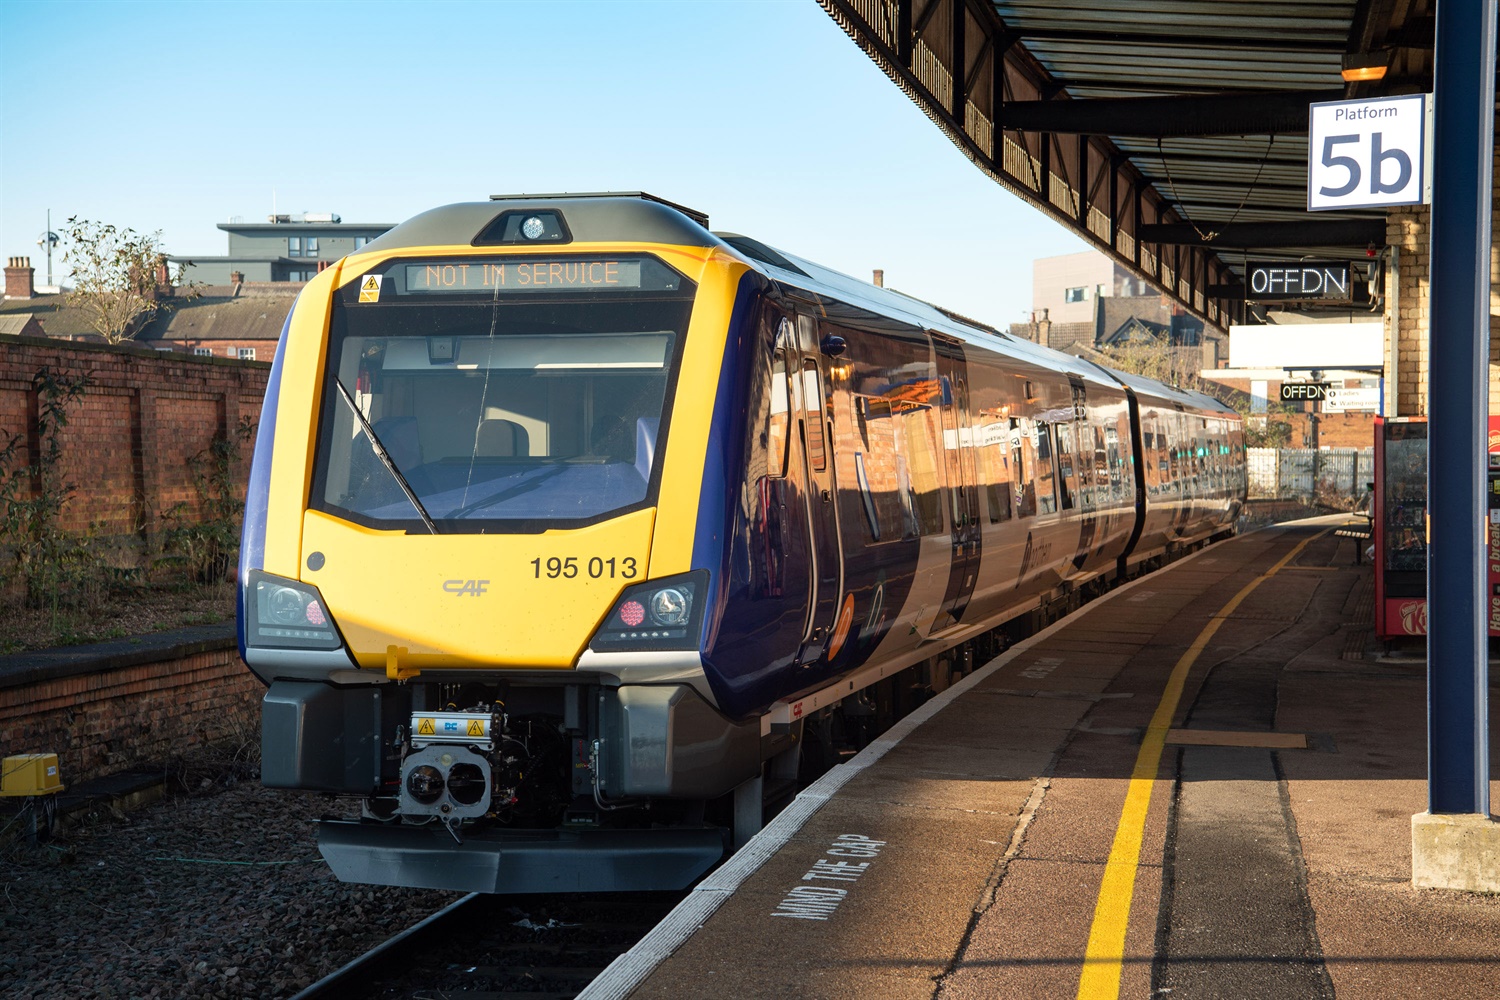 New Northern trains announced across their routes